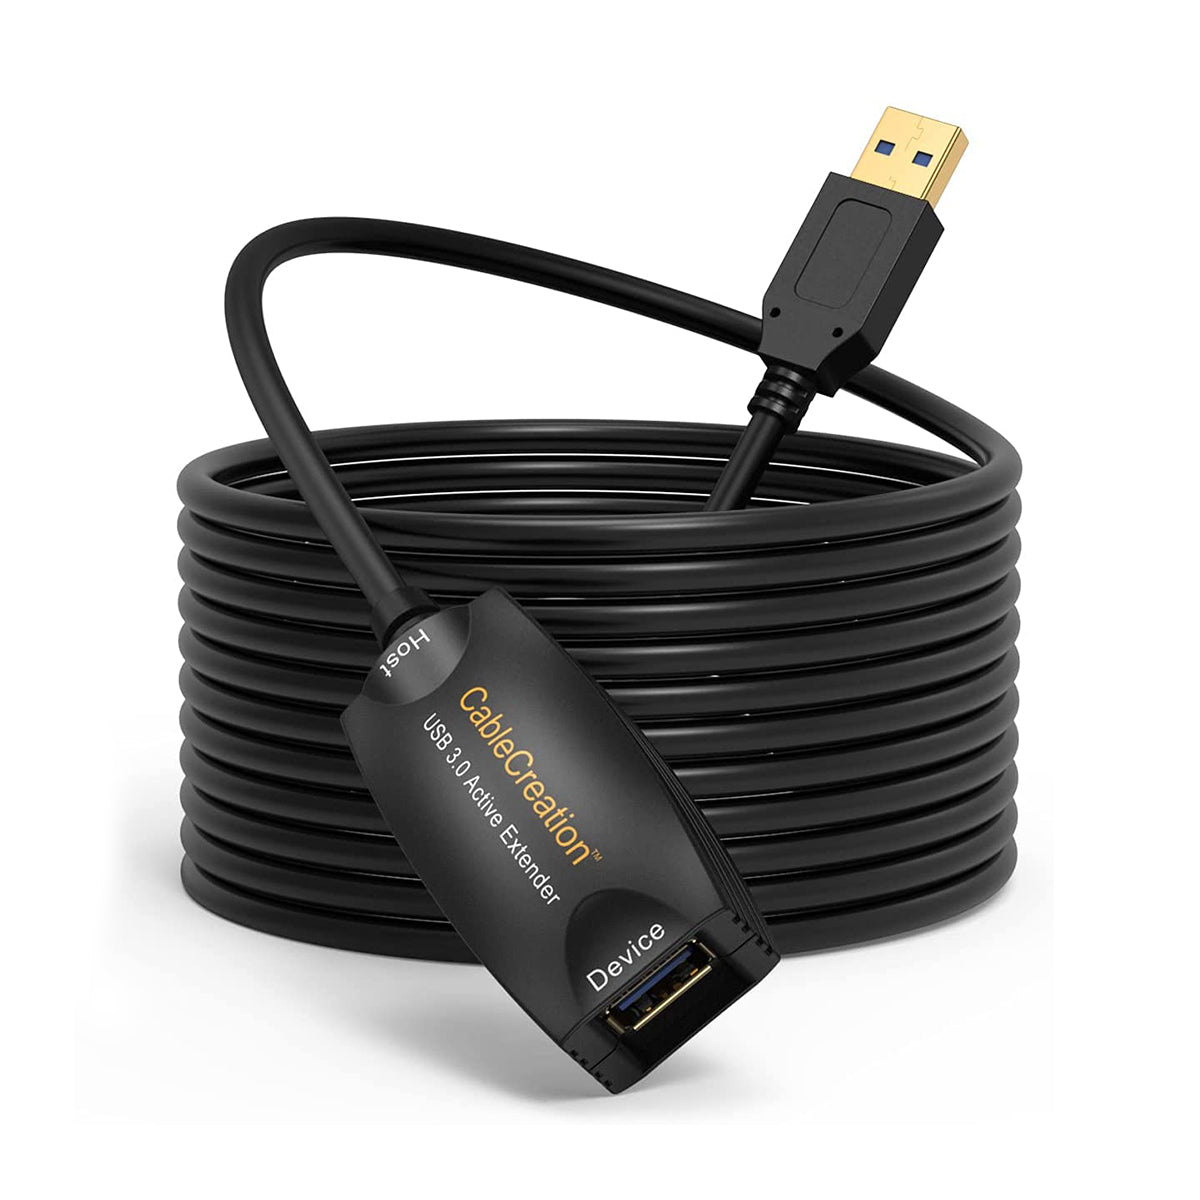 Active USB Extension Cable 16.4 FT